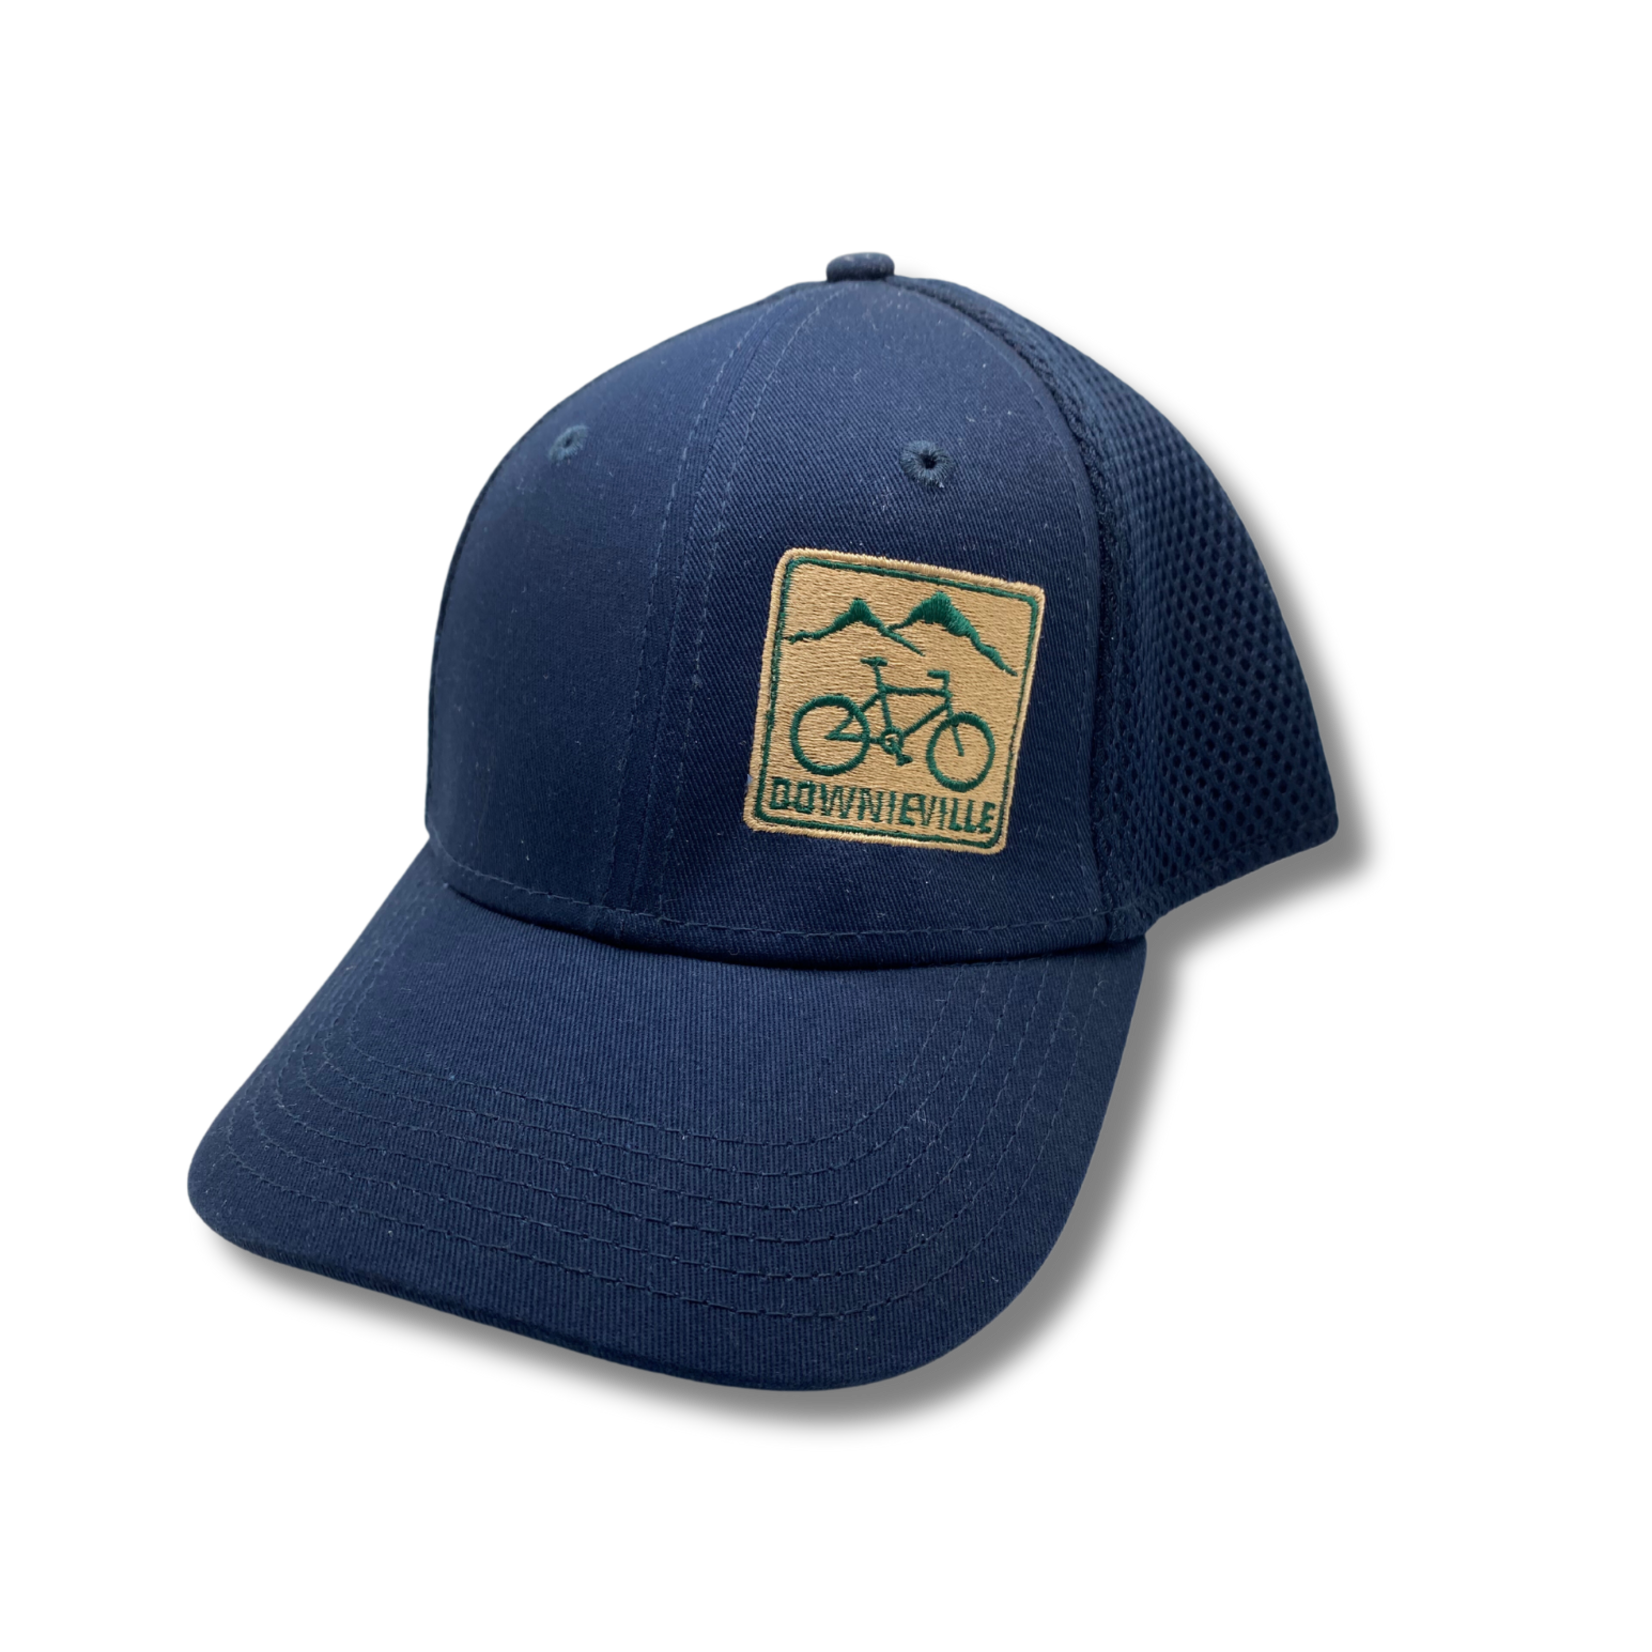 Yuba Expeditions Yuba Expeditions Youth Hat Navy Downieville Forest Bike Green Tan